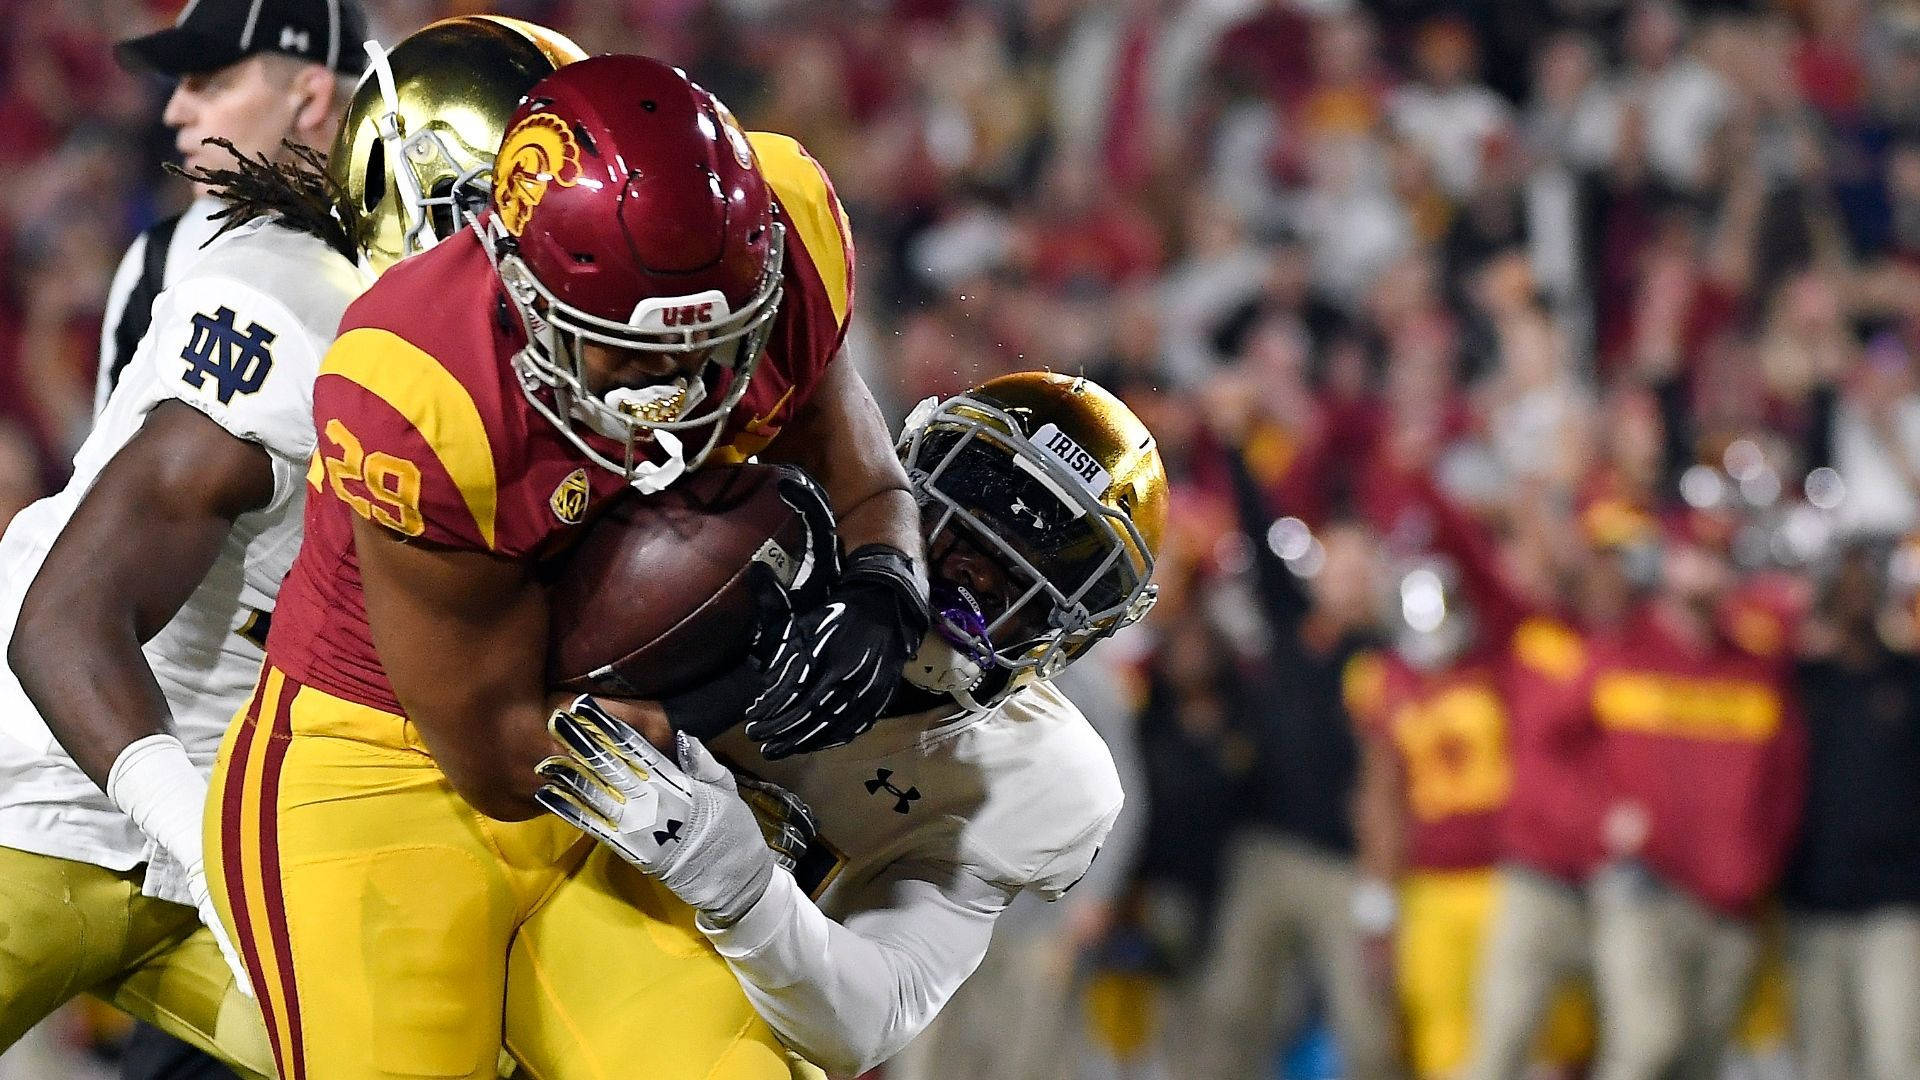 Usc Football Player Tackled